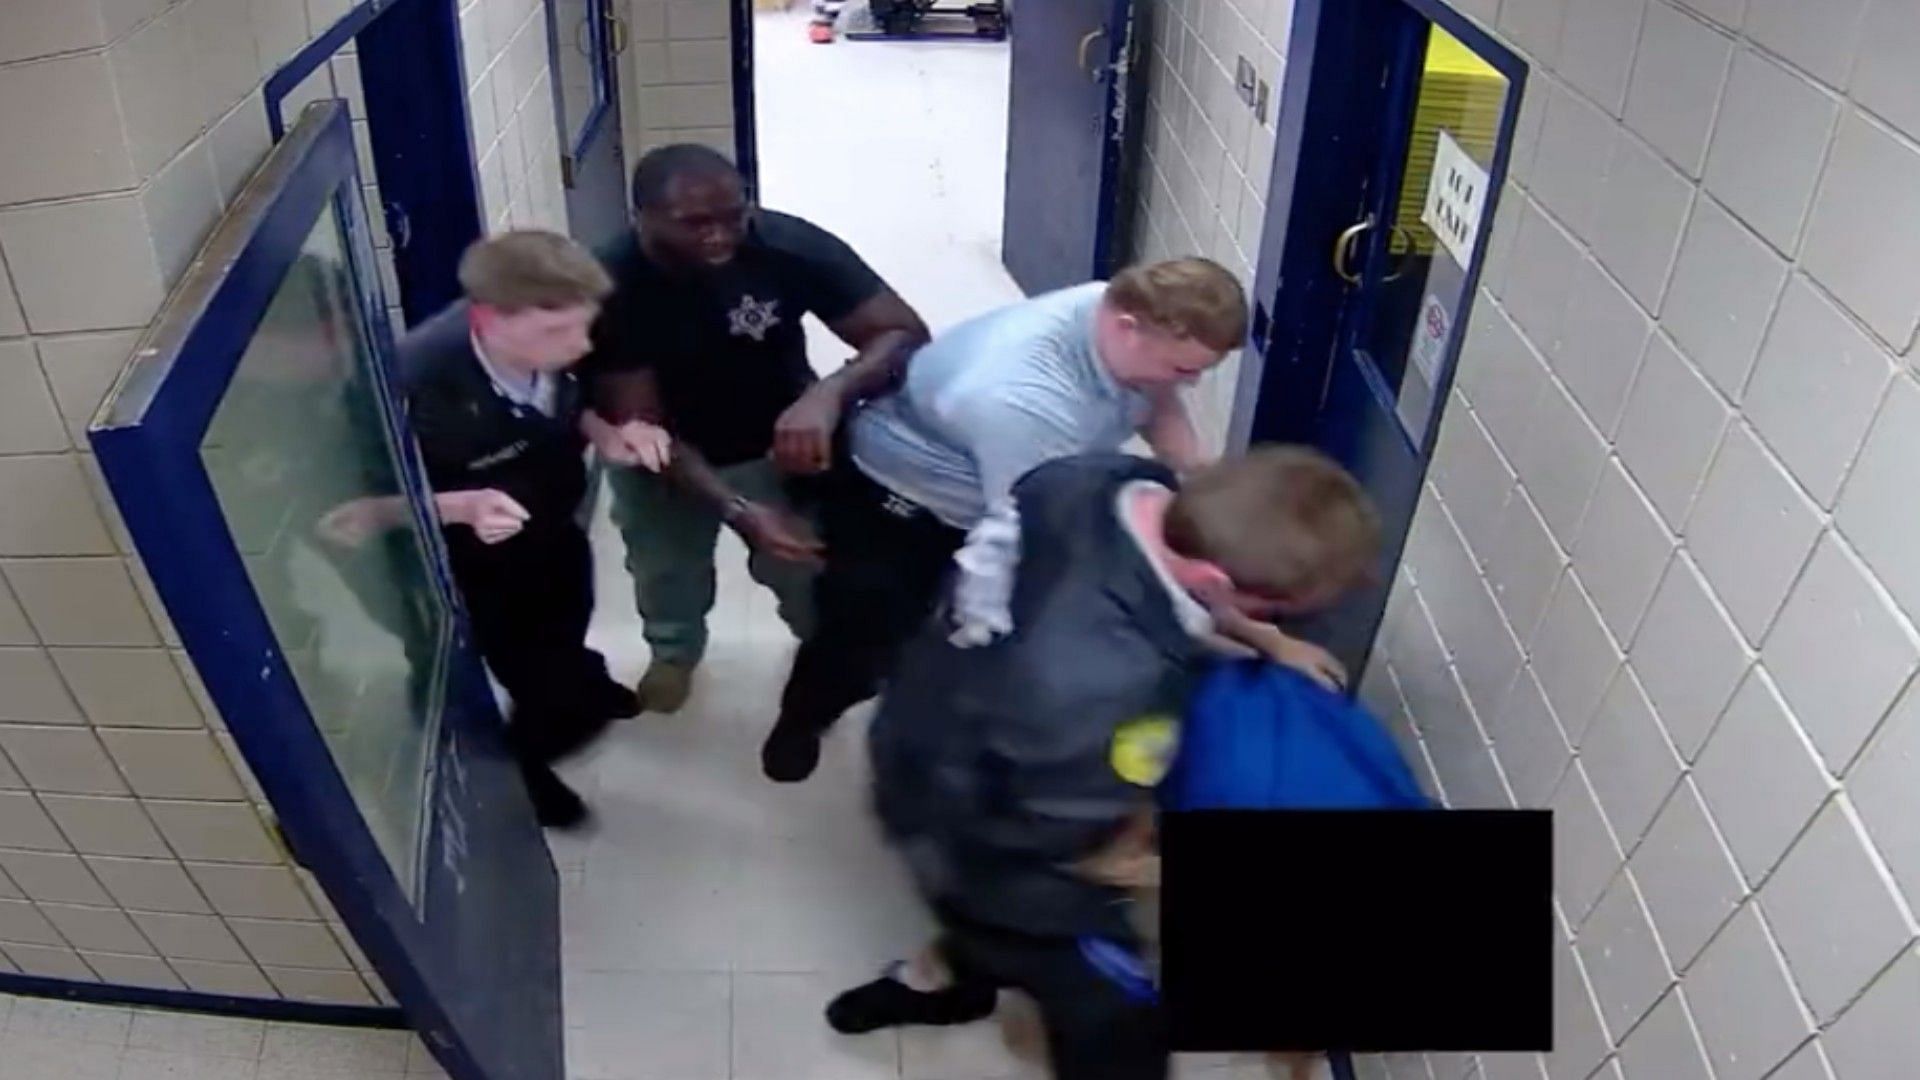 Jarrett Hobbs was violently attacked by officers while in custody in September (Image via YouTube)